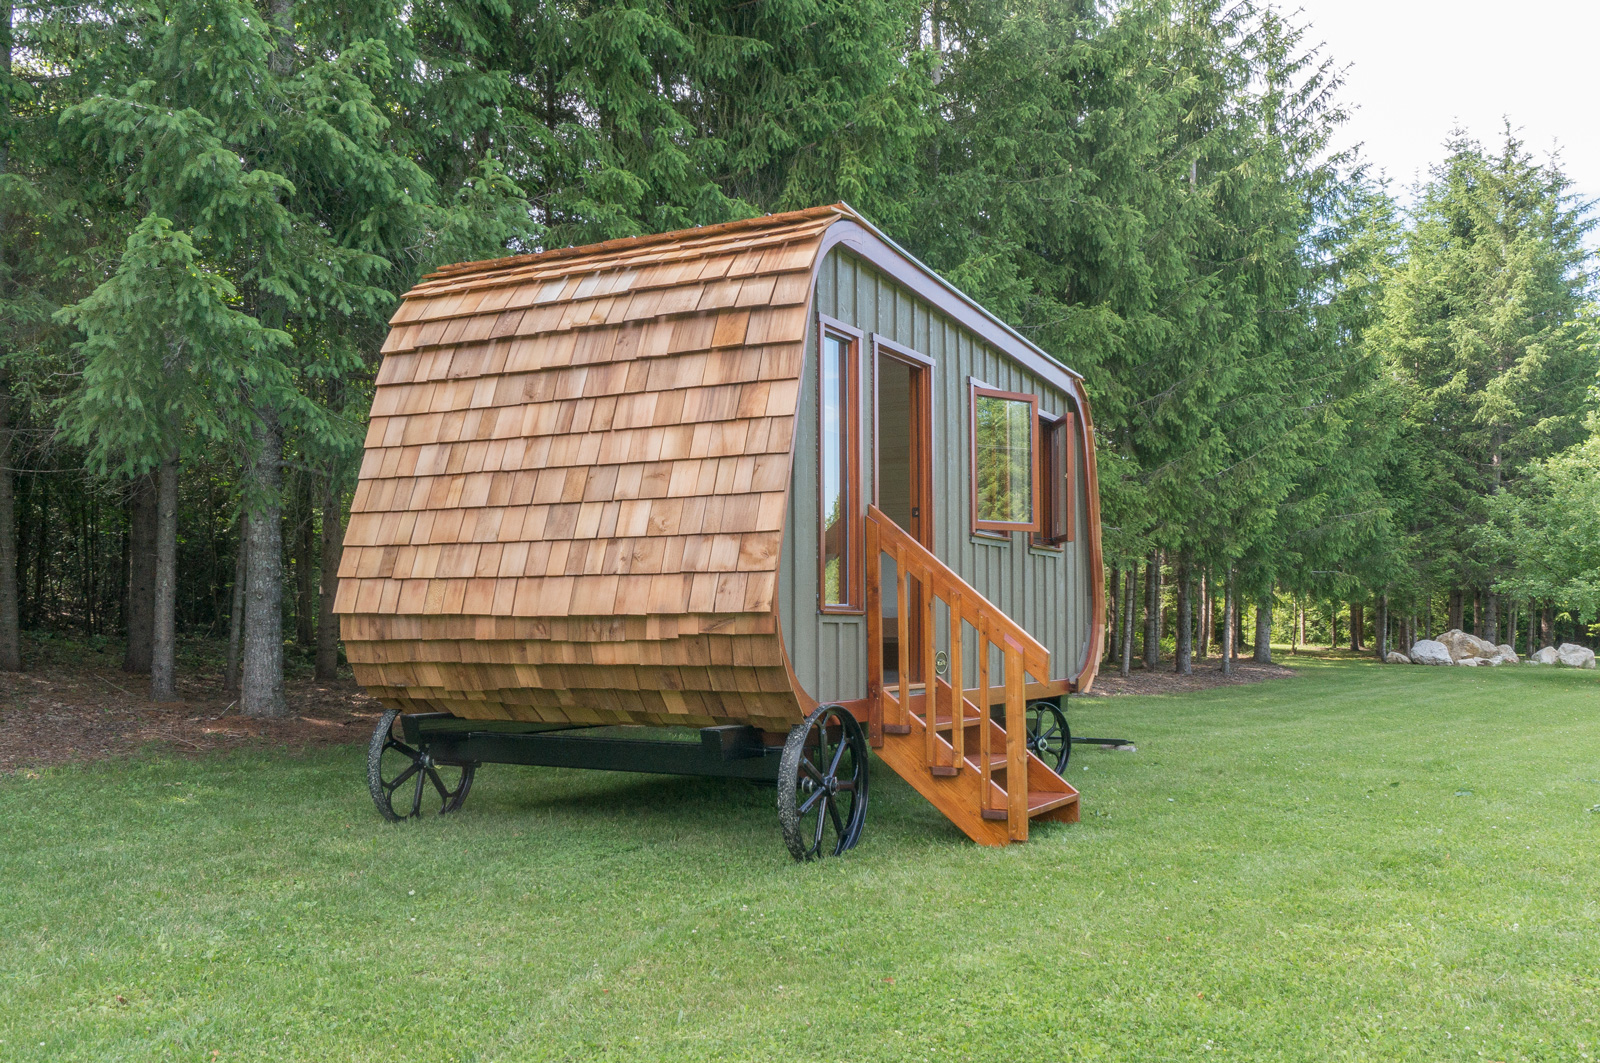 Tiny home on a trailer frame with a cart look on large metal wheels, featuring a roof that wraps around and green sides with large windows that has wood frames.